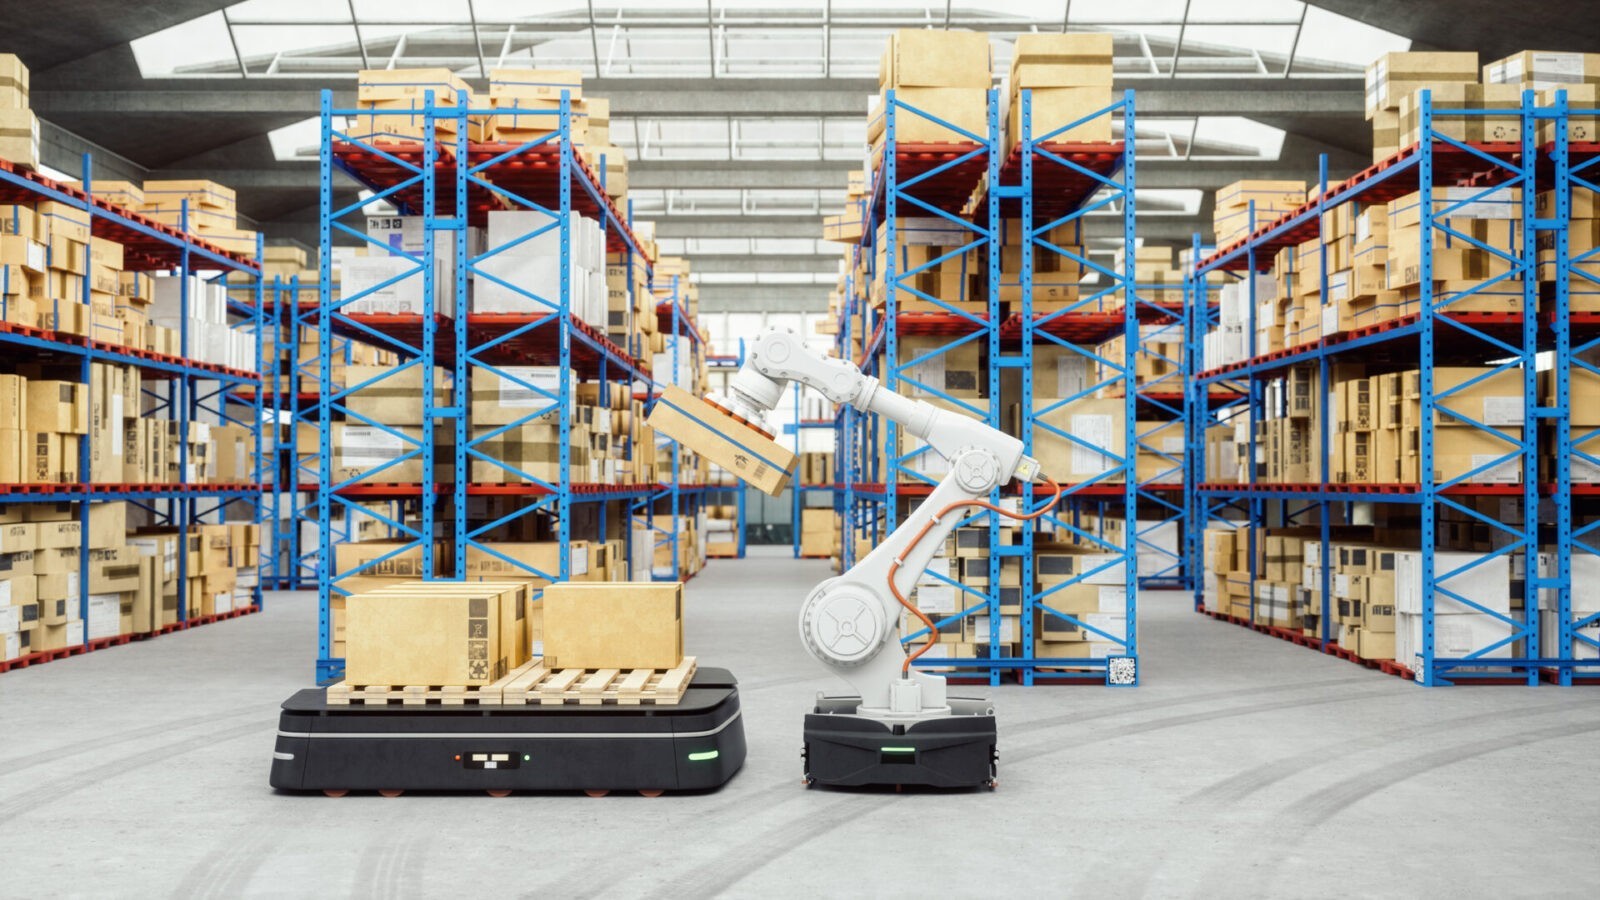 Robot carriers and robotic arm in modern distribution warehouse